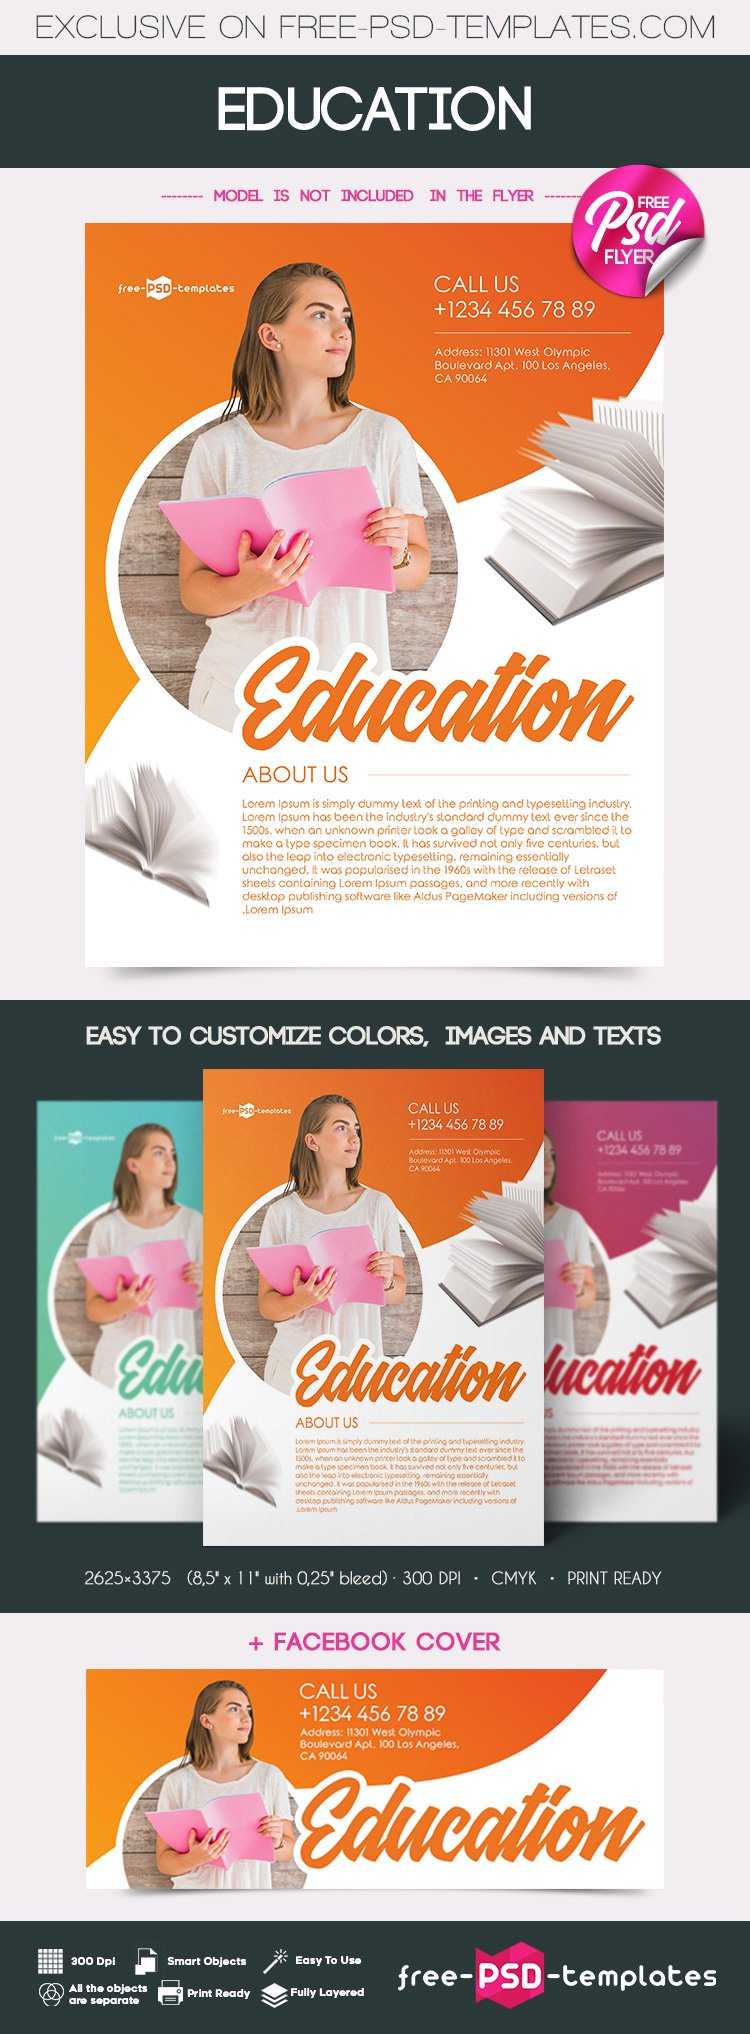 Free Education Flyer In Psd | Free Psd Templates In Free Education Flyer Templates